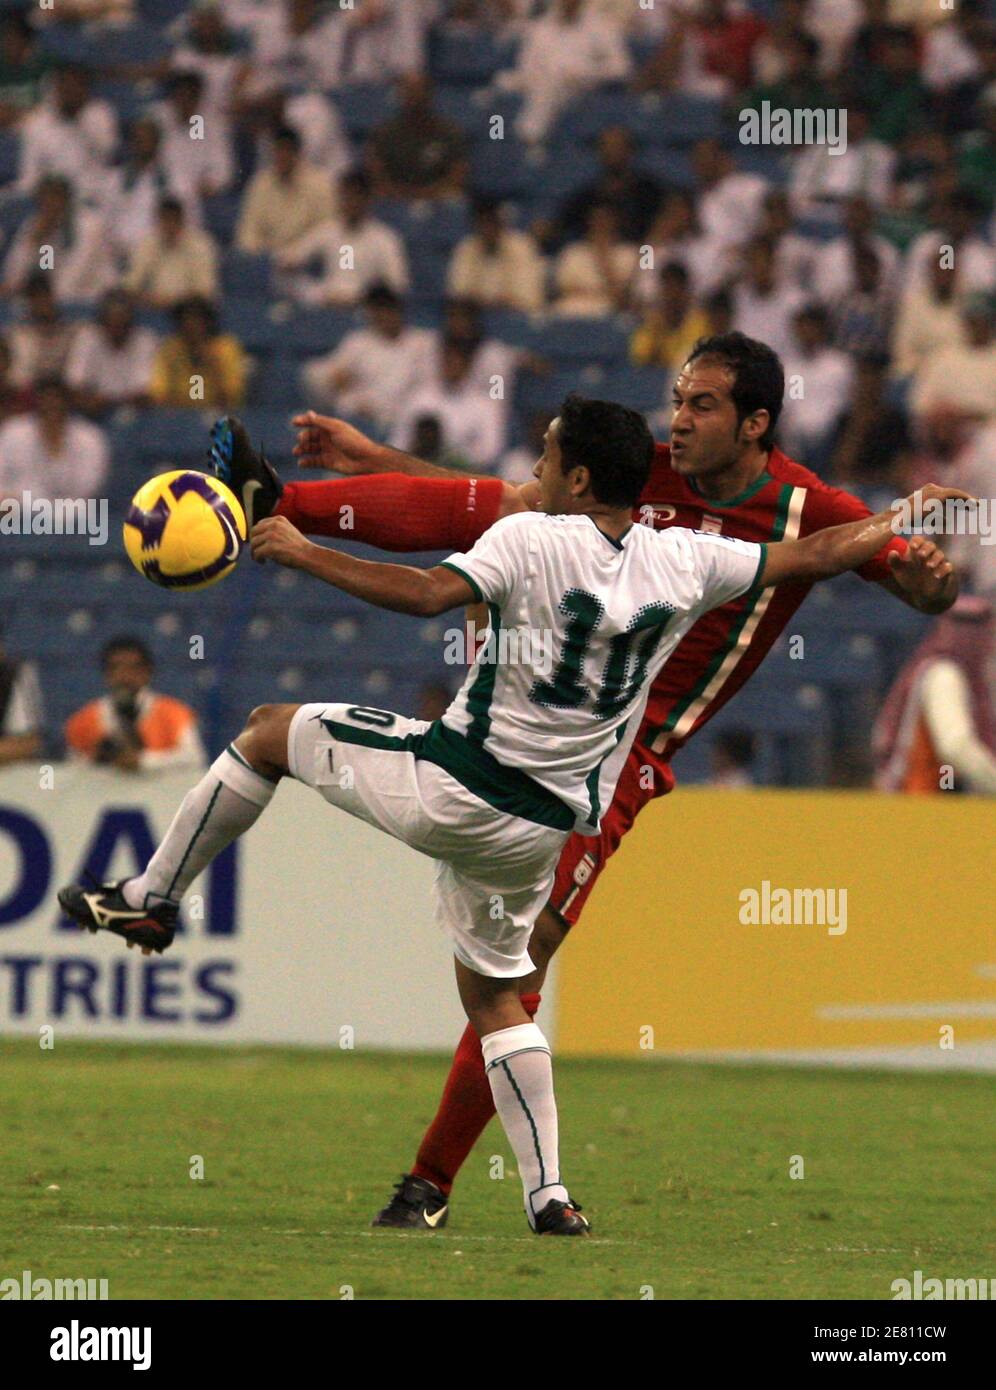 Saudi's Muhammad Shalhoub (L) fights for the ball with Iran's Star Zare during their World Cup 2010 qualifying soccer match in Riyadh September 6, 2008.  REUTERS/Fahad Shadeed  (SAUDI ARABIA) Stock Photo